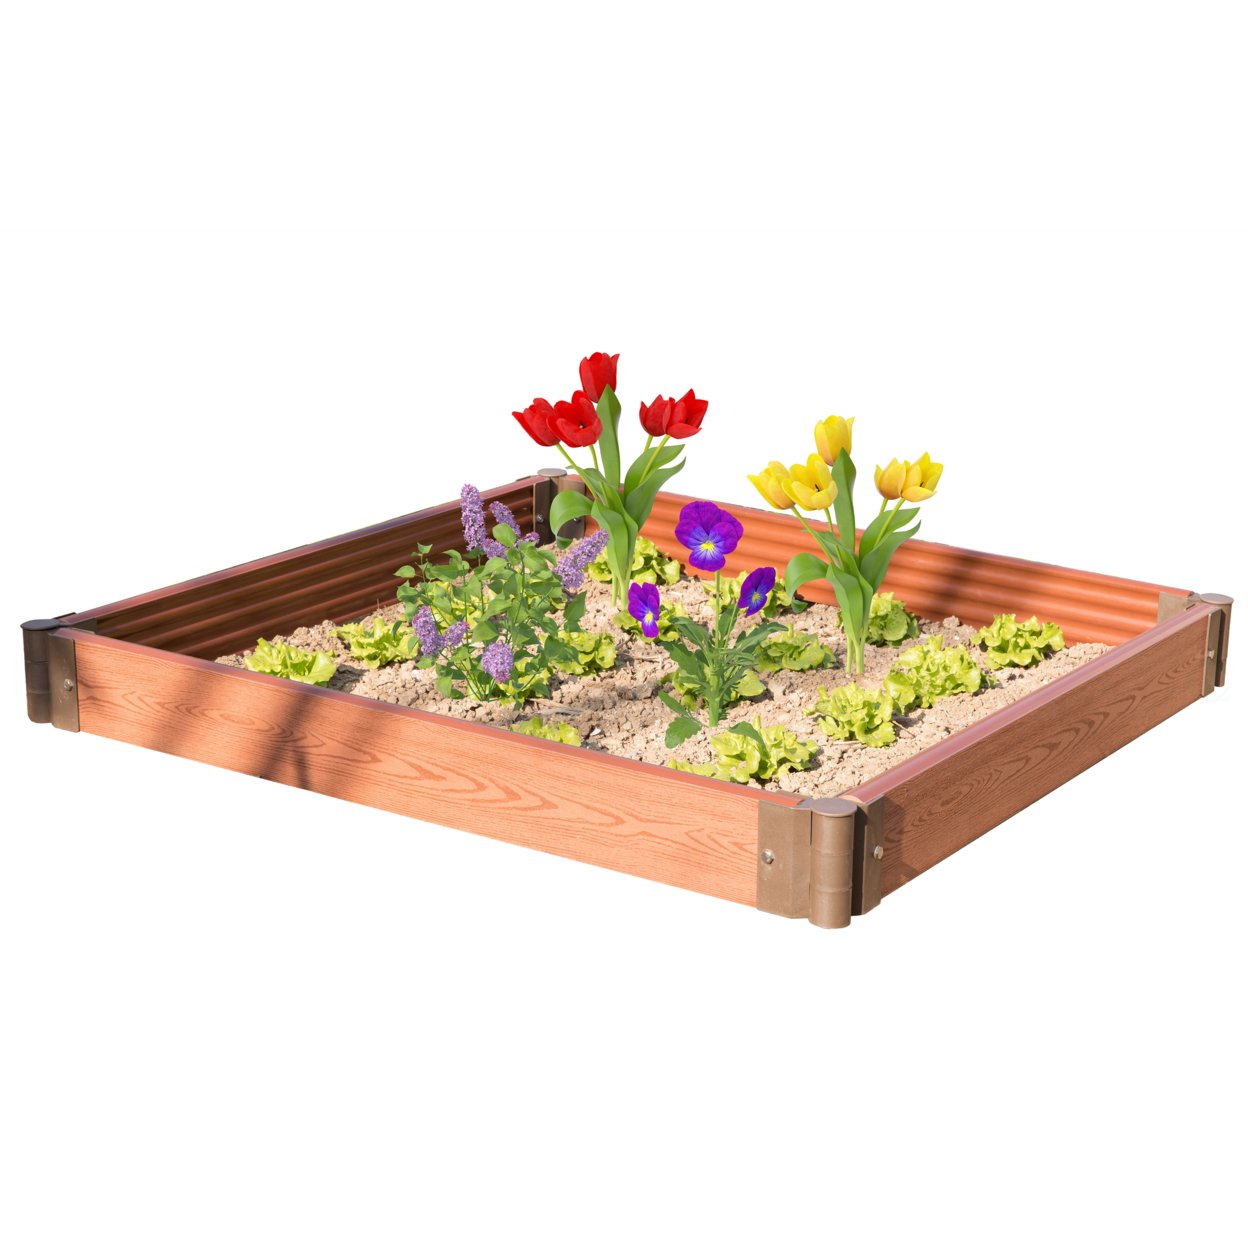 Classic Traditional Durable Wood- Look Raised Outdoor Garden Bed Flower Planter Box - large set of 4